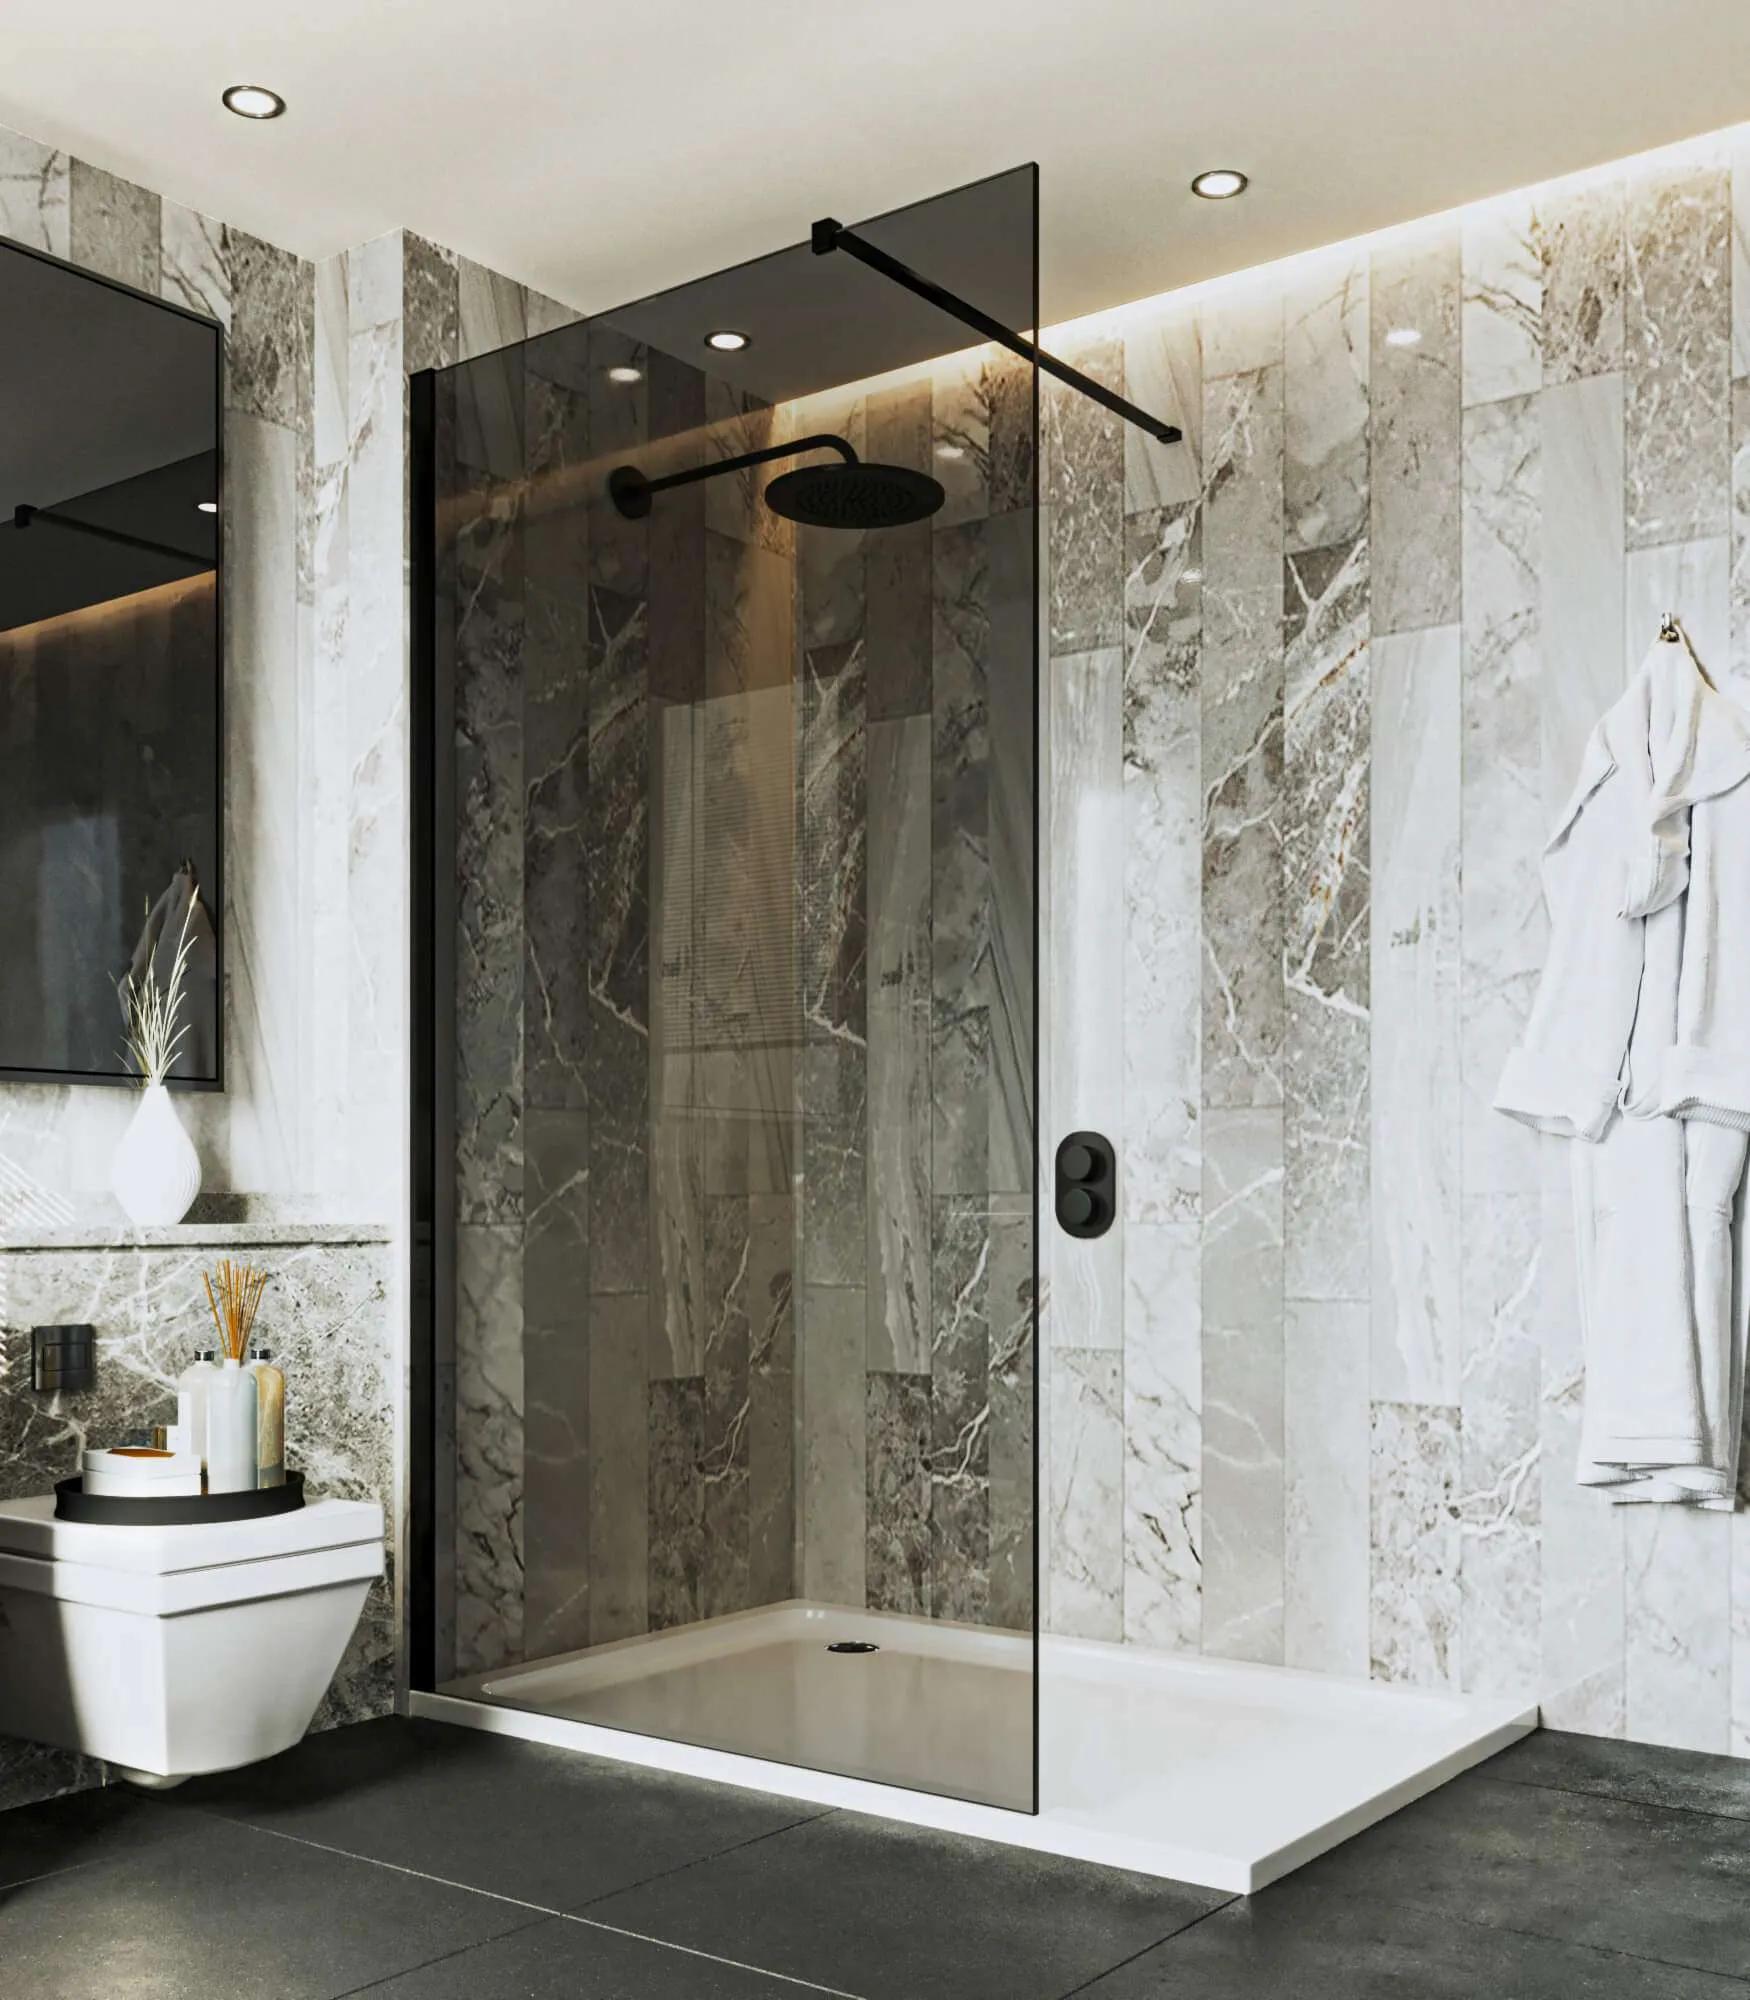 smoked glass wetroom screen - Are glass shower screens safe